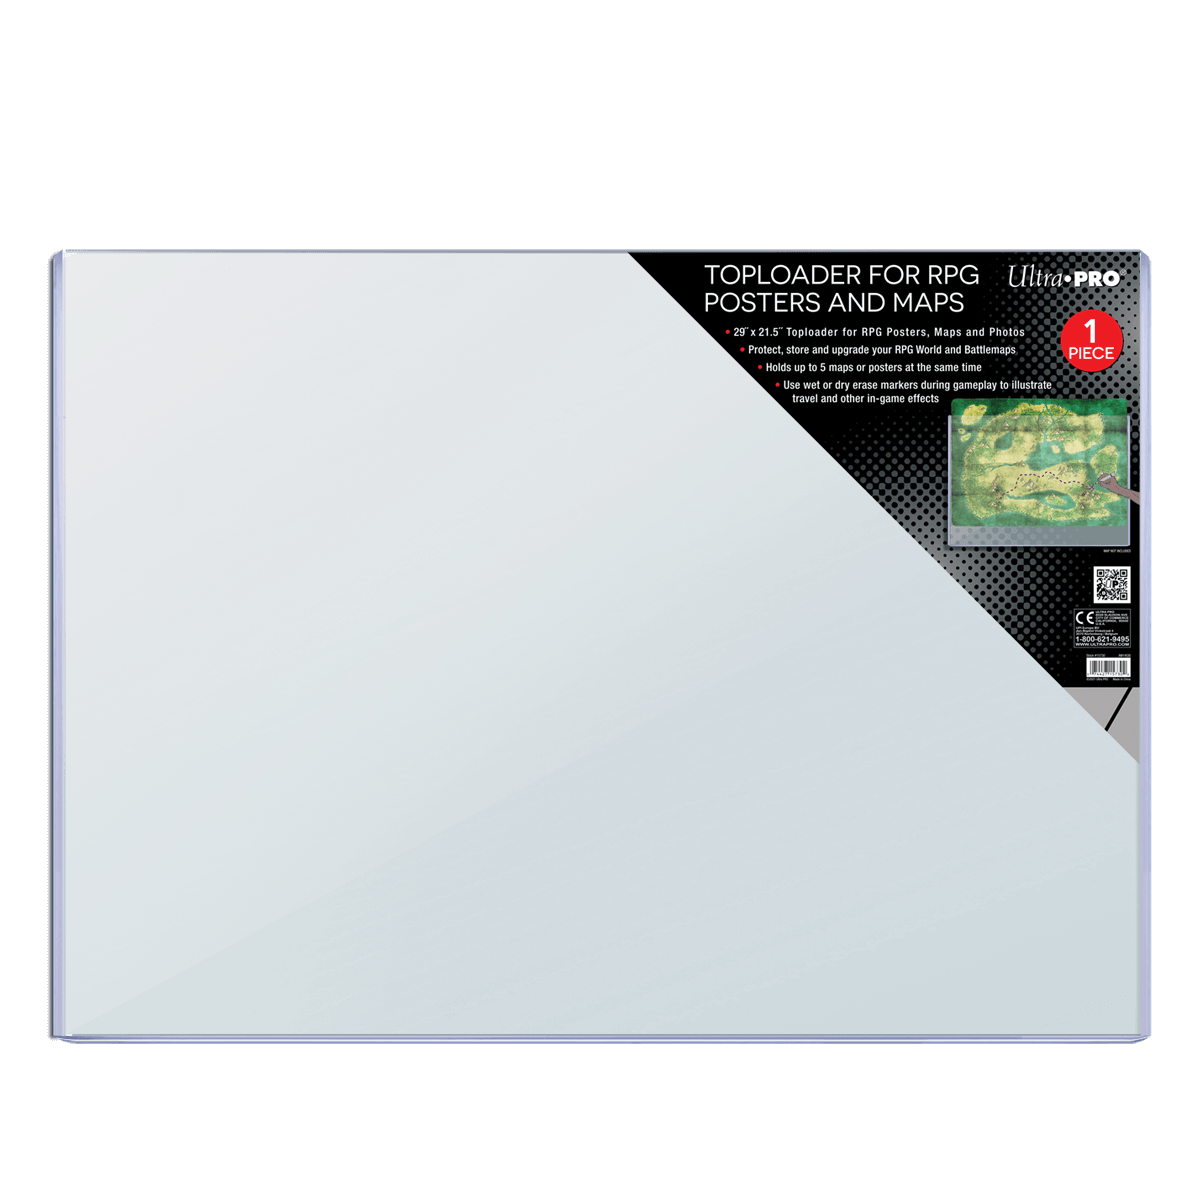 29" x 21.5" Toploader for RPG Posters and Maps | Ultra PRO International